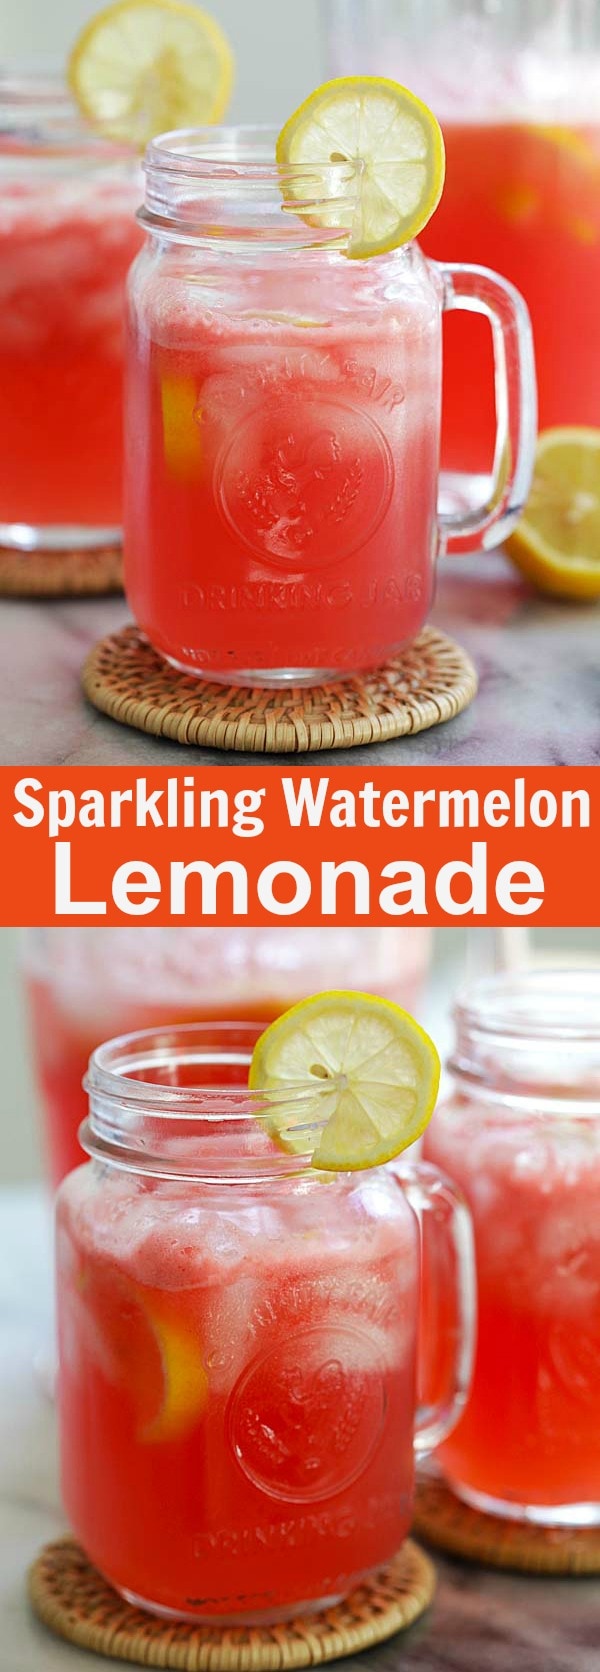 Sparkling Watermelon Lemonade - this bubbly watermelon lemonade recipe is all you need this summer. So refreshing and so easy to make | rasamalaysia.com